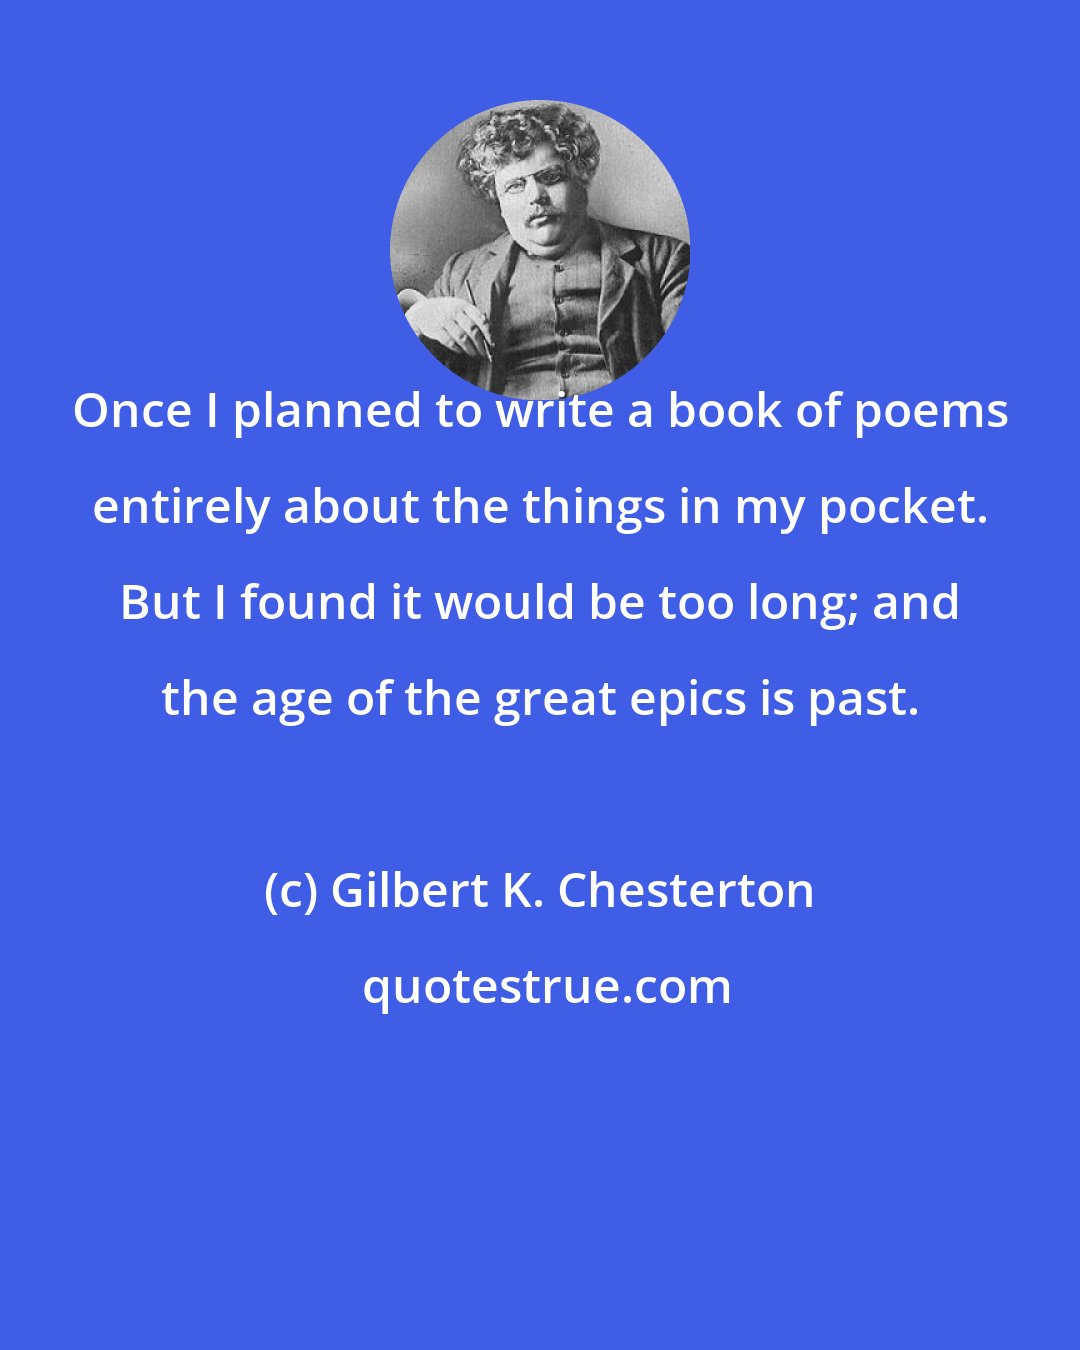 Gilbert K. Chesterton: Once I planned to write a book of poems entirely about the things in my pocket. But I found it would be too long; and the age of the great epics is past.